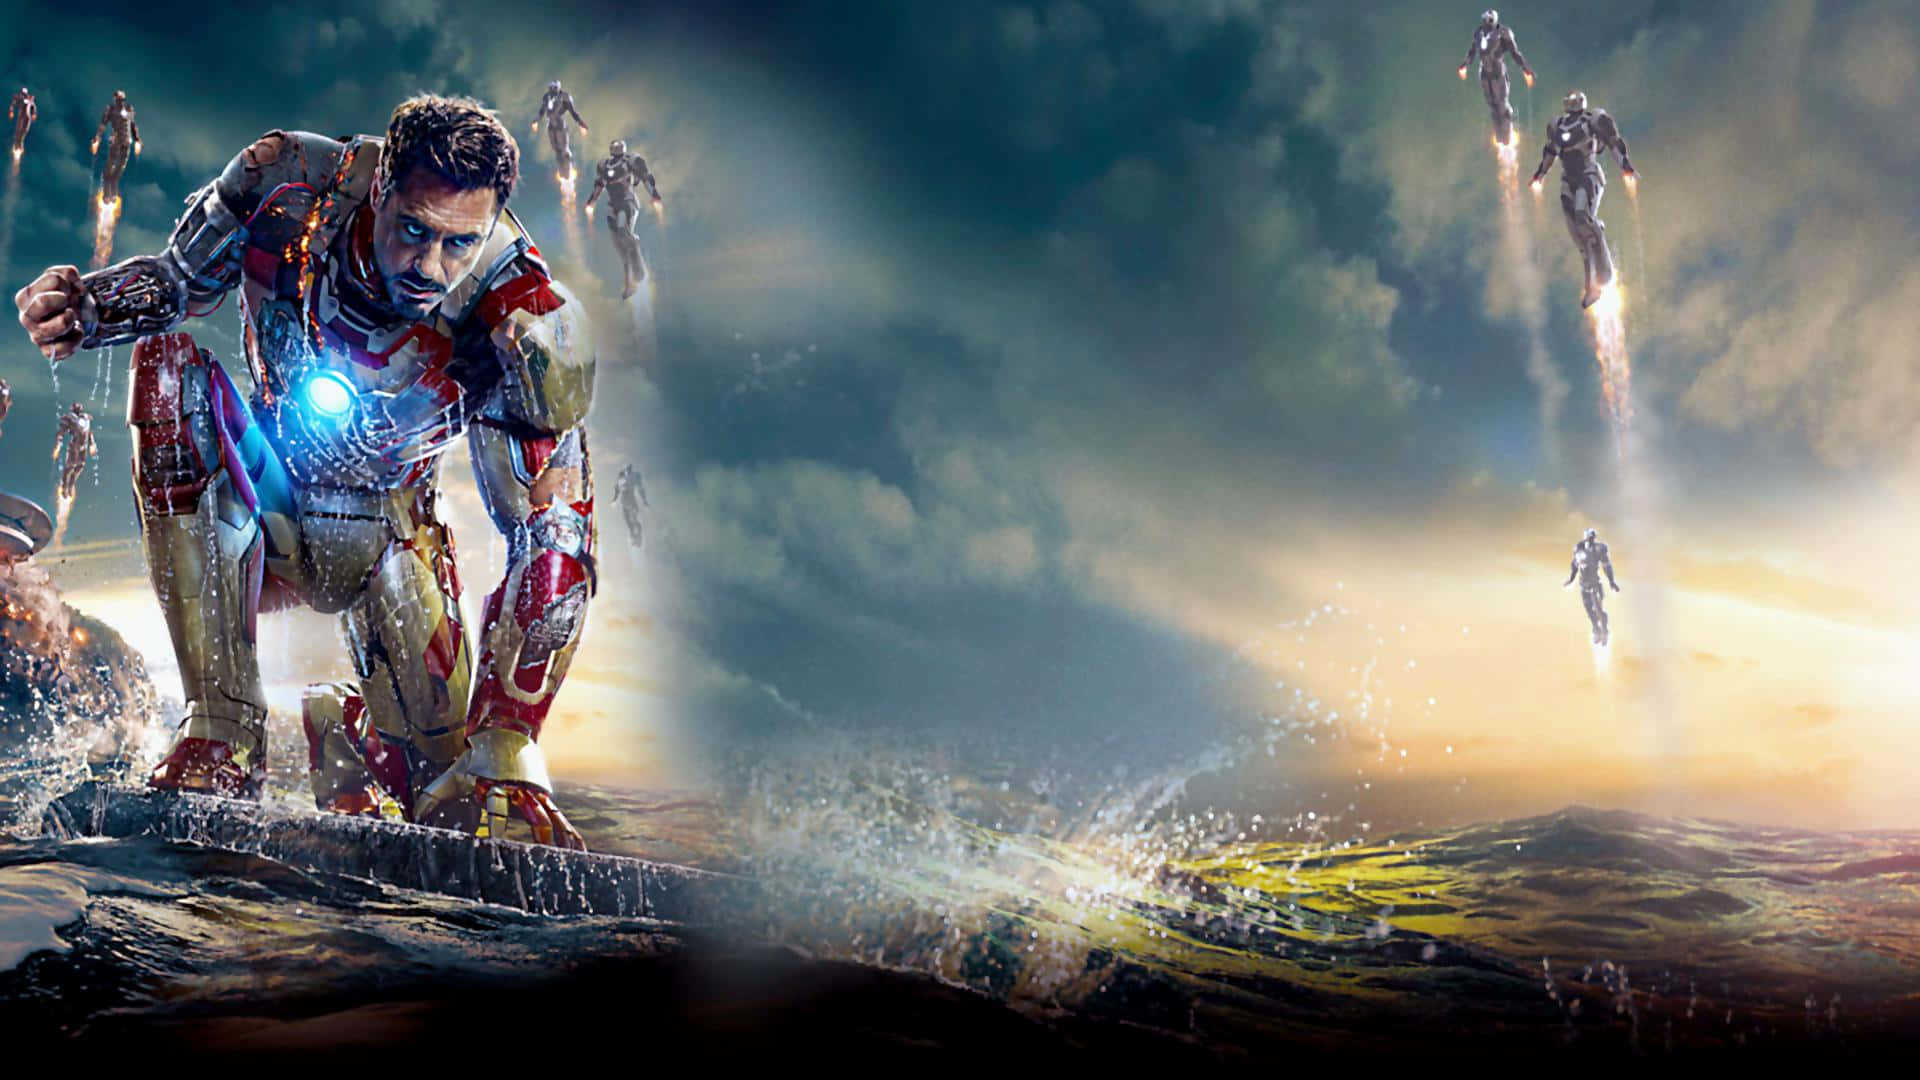 Iron Man 3 - Suit Up For a Wild Adventure Wallpaper